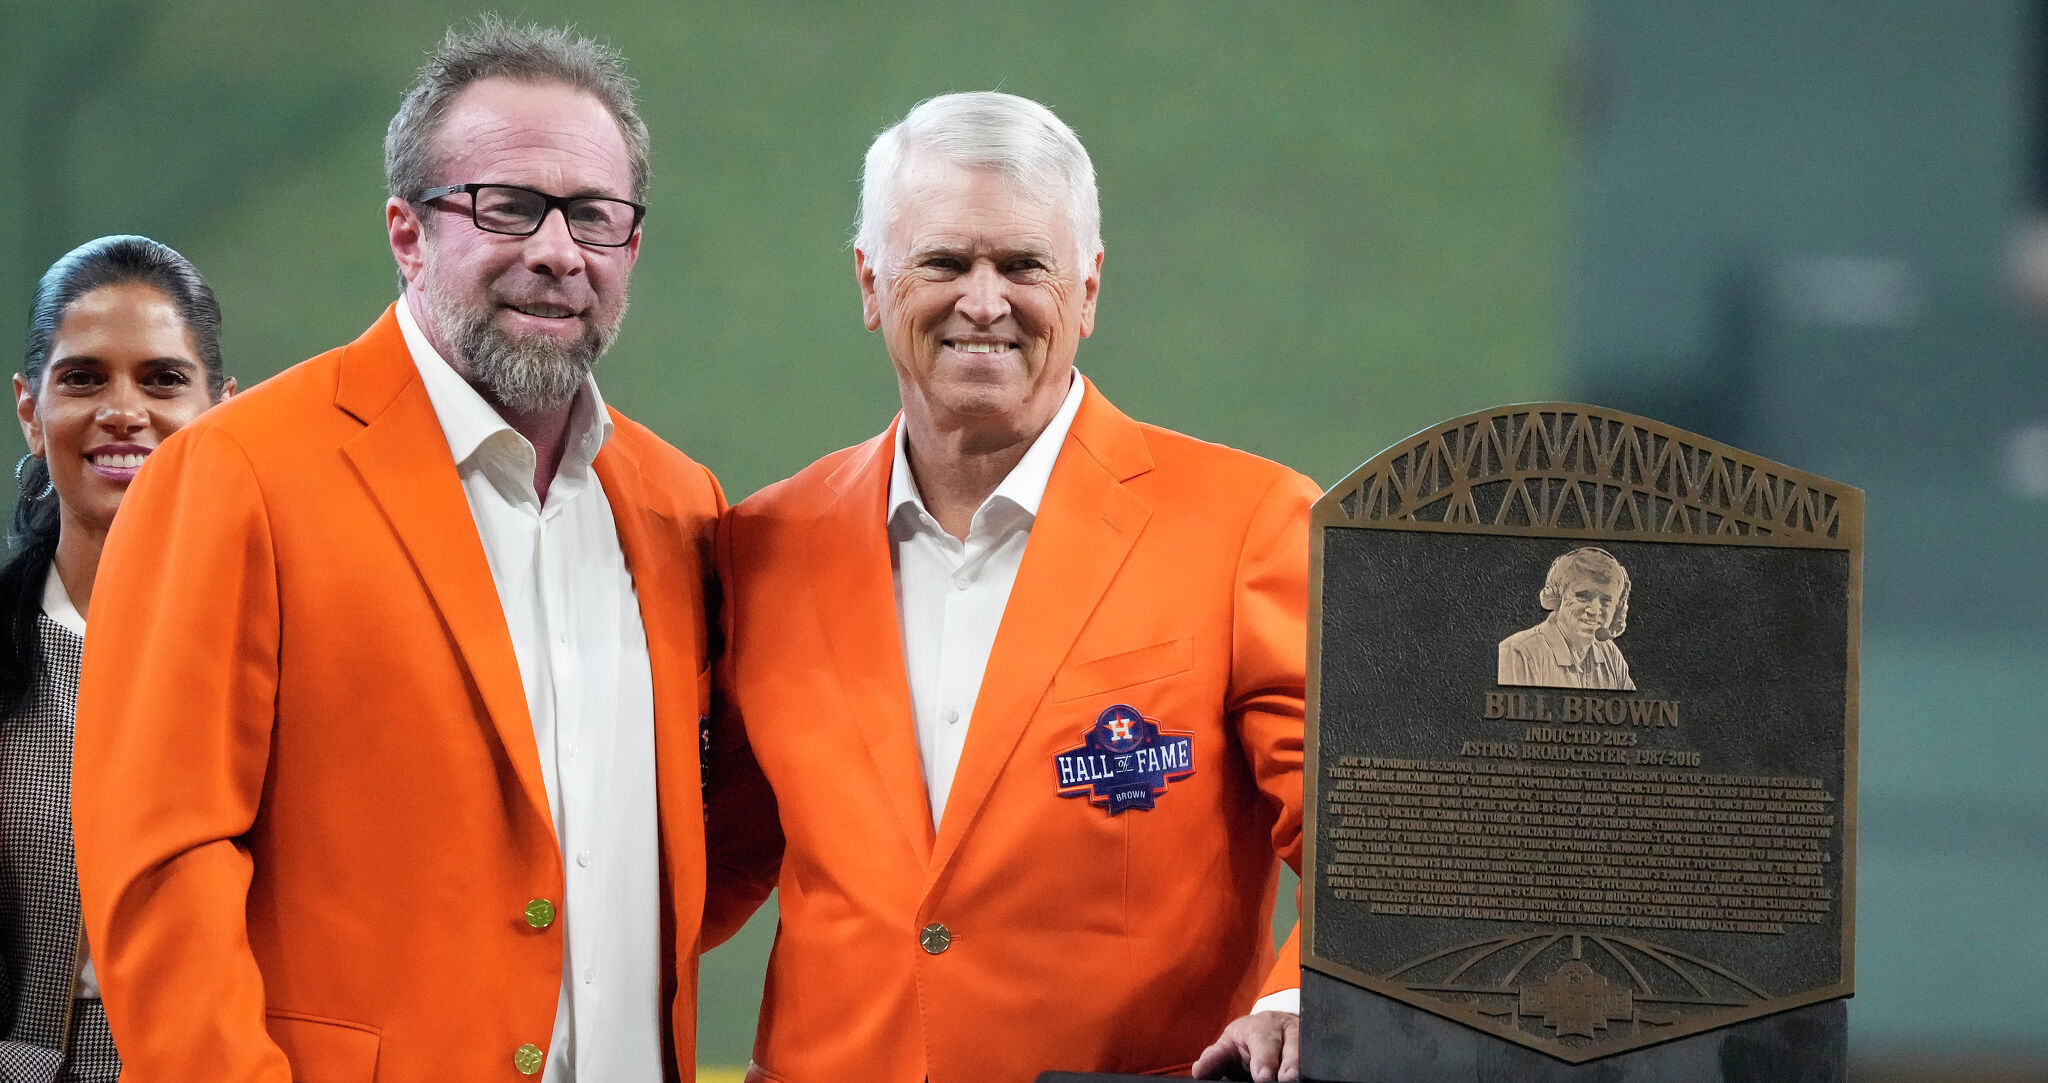 Bill Brown, Bill Doran inducted into Astros Hall of Fame